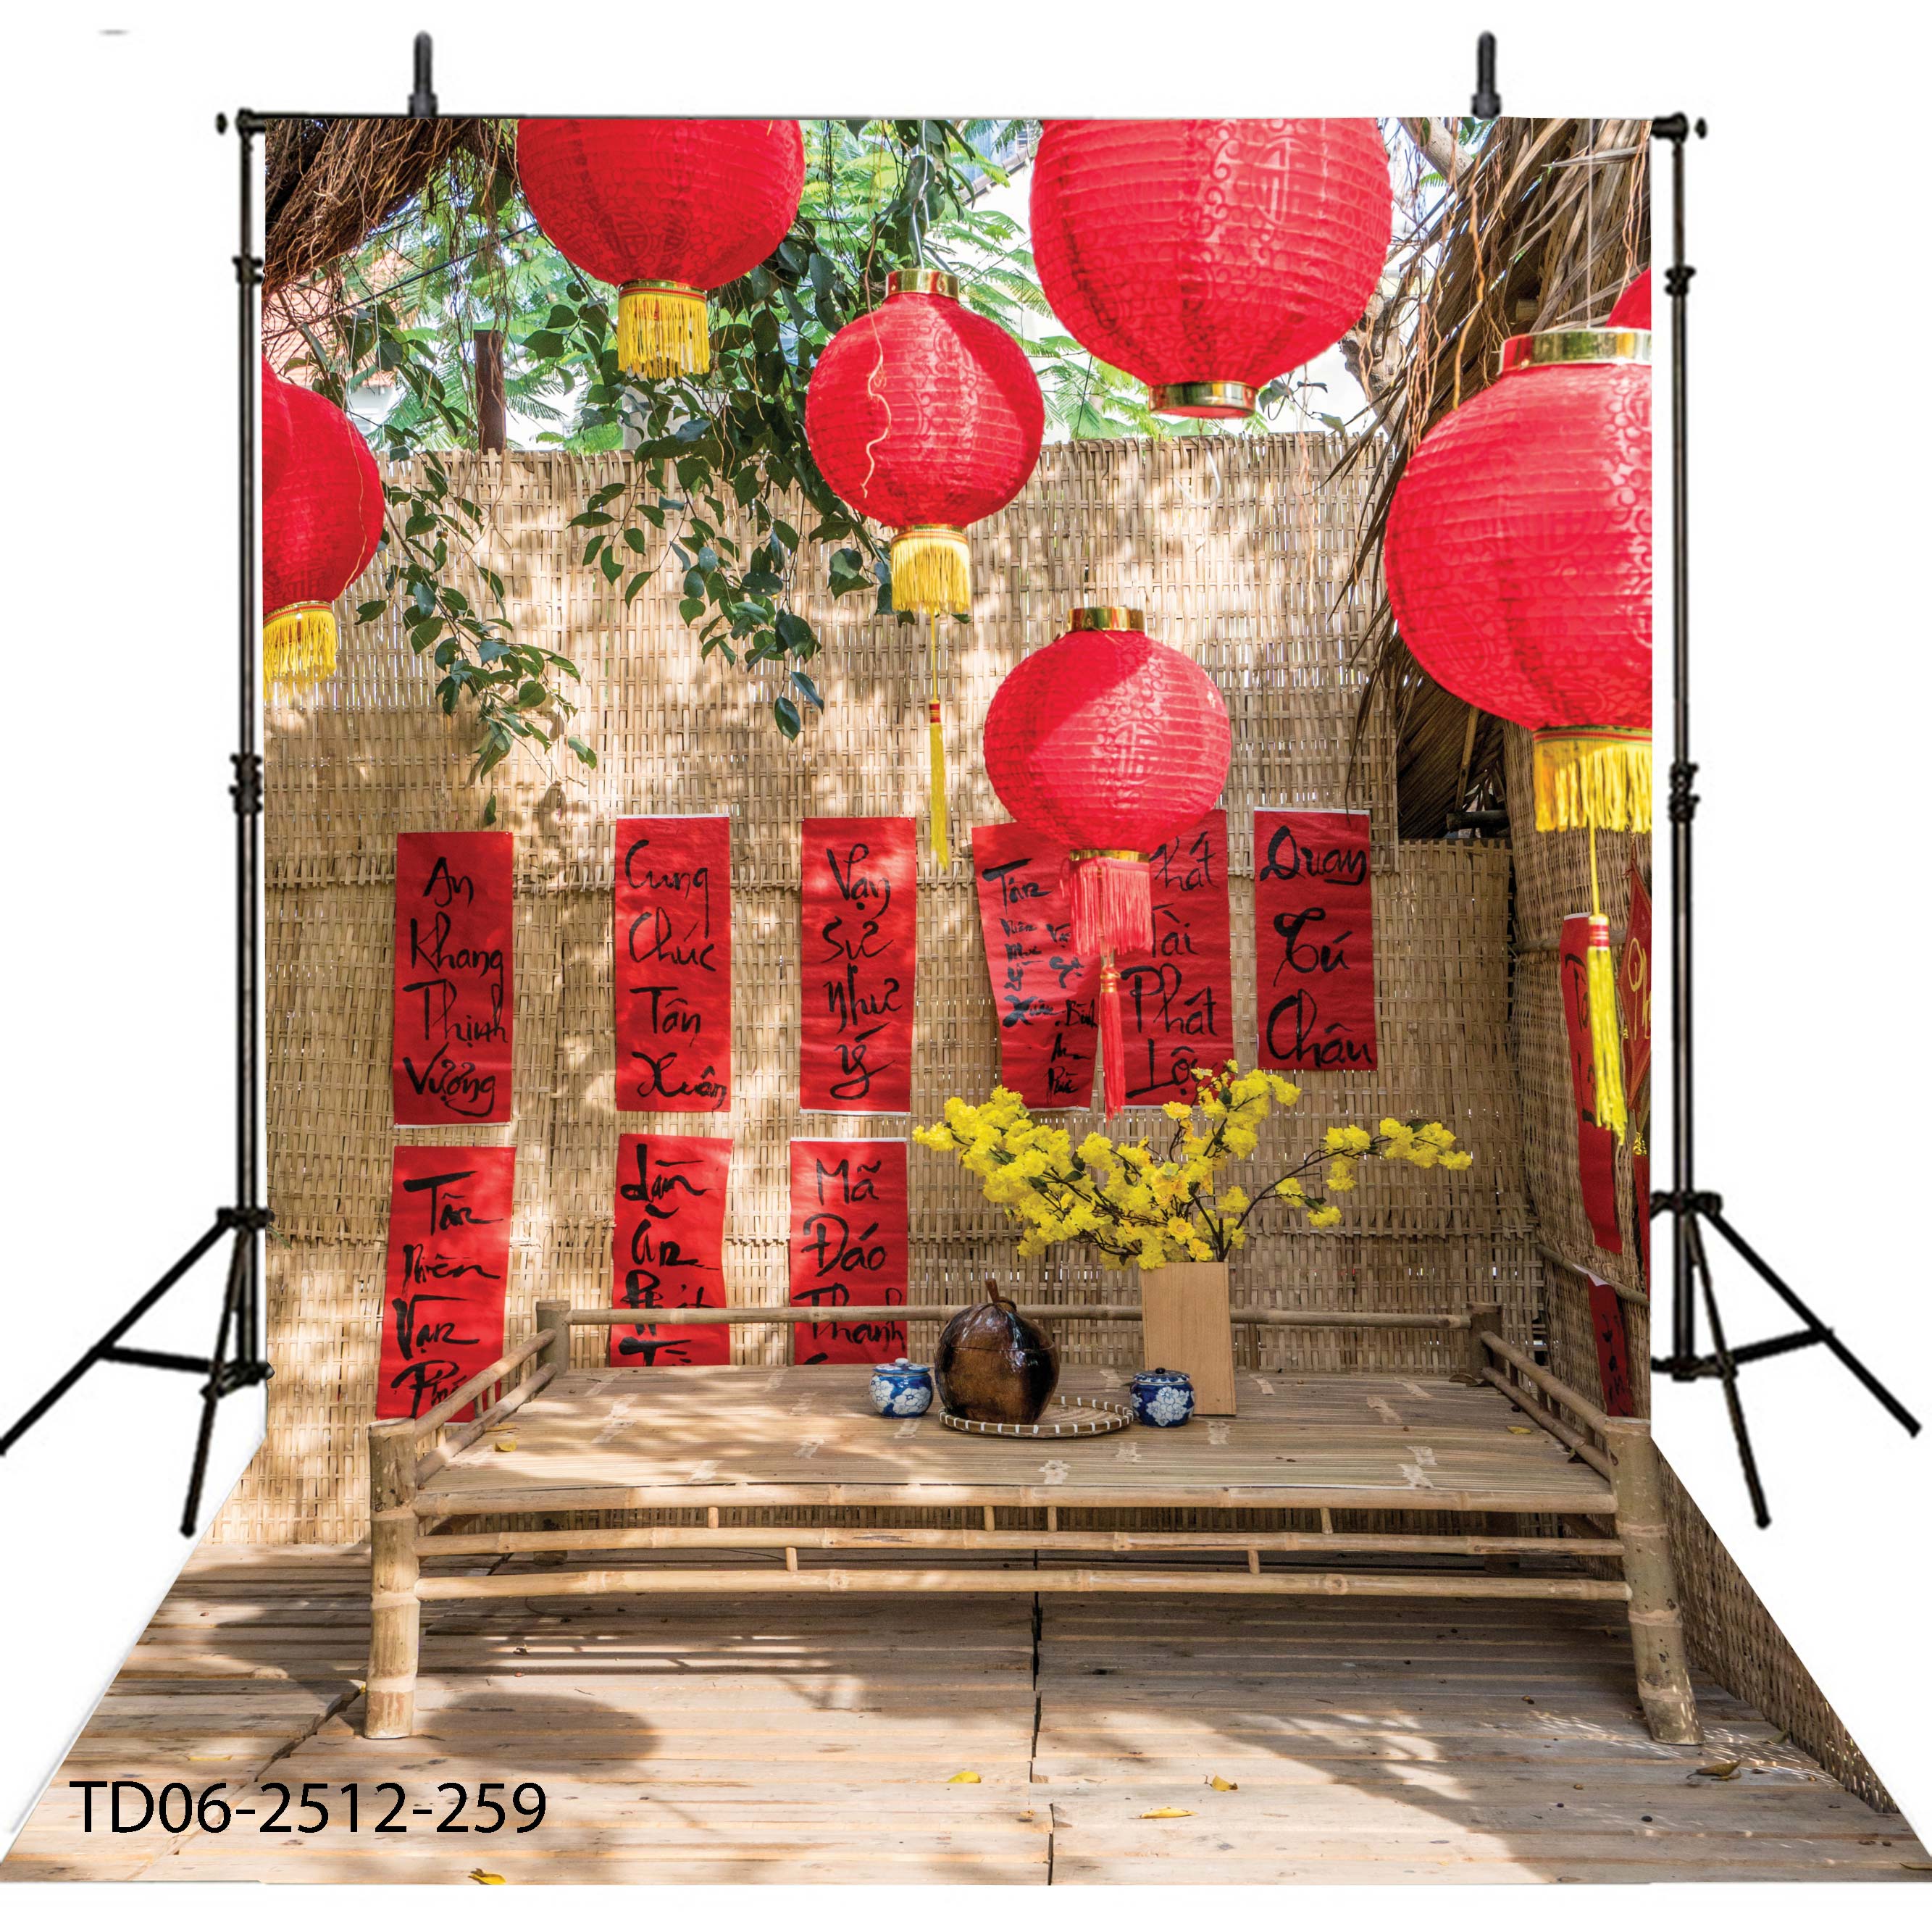 Are you getting overwhelmed with preparing your house for Tet? Don\'t forget to add some festivity to your photos with Phông nền trang trí tết đẹp nhất! Our backgrounds are carefully selected and designed that bring the joy and the spirit of Tet right into your photos. Get ready to receive compliments from family and friends on your gorgeous Tet photos!